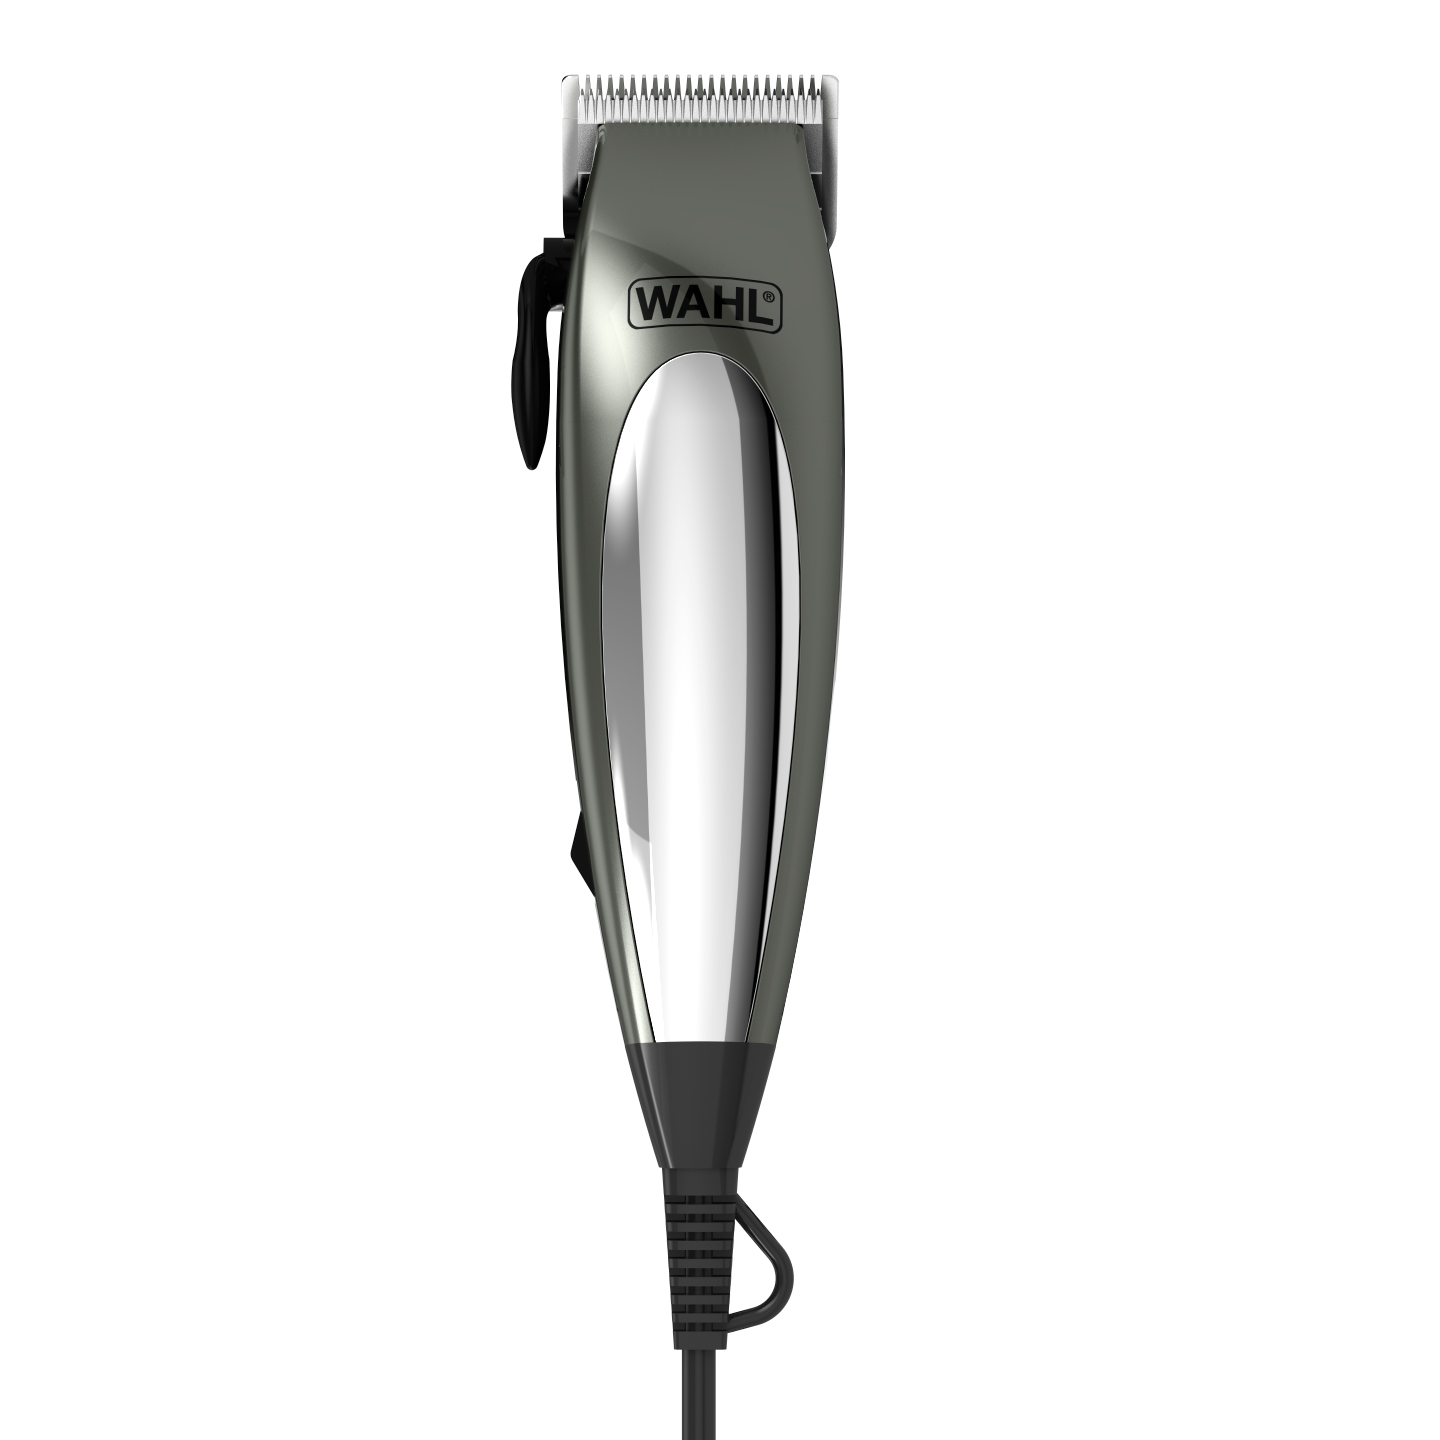 mains clippers